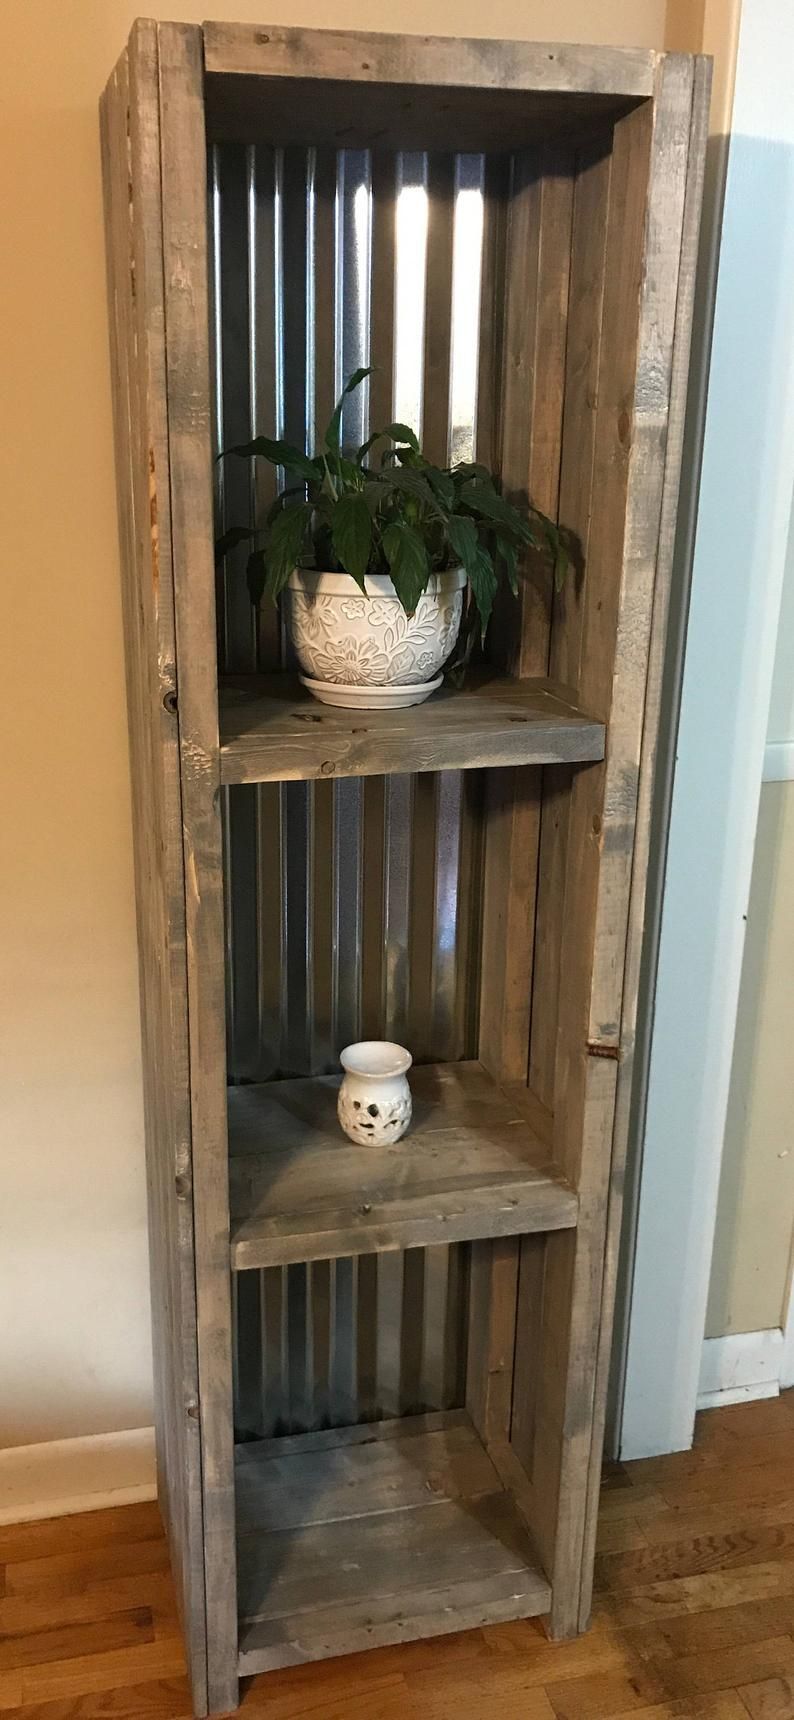 Items similar to Farmhouse Shelving with Tin Backing and a Gray Rustic Finish Bathroom Shelving, Bookcase or Living Area Shelving for Decor on Etsy - Items similar to Farmhouse Shelving with Tin Backing and a Gray Rustic Finish Bathroom Shelving, Bookcase or Living Area Shelving for Decor on Etsy -   13 diy Furniture rustic ideas